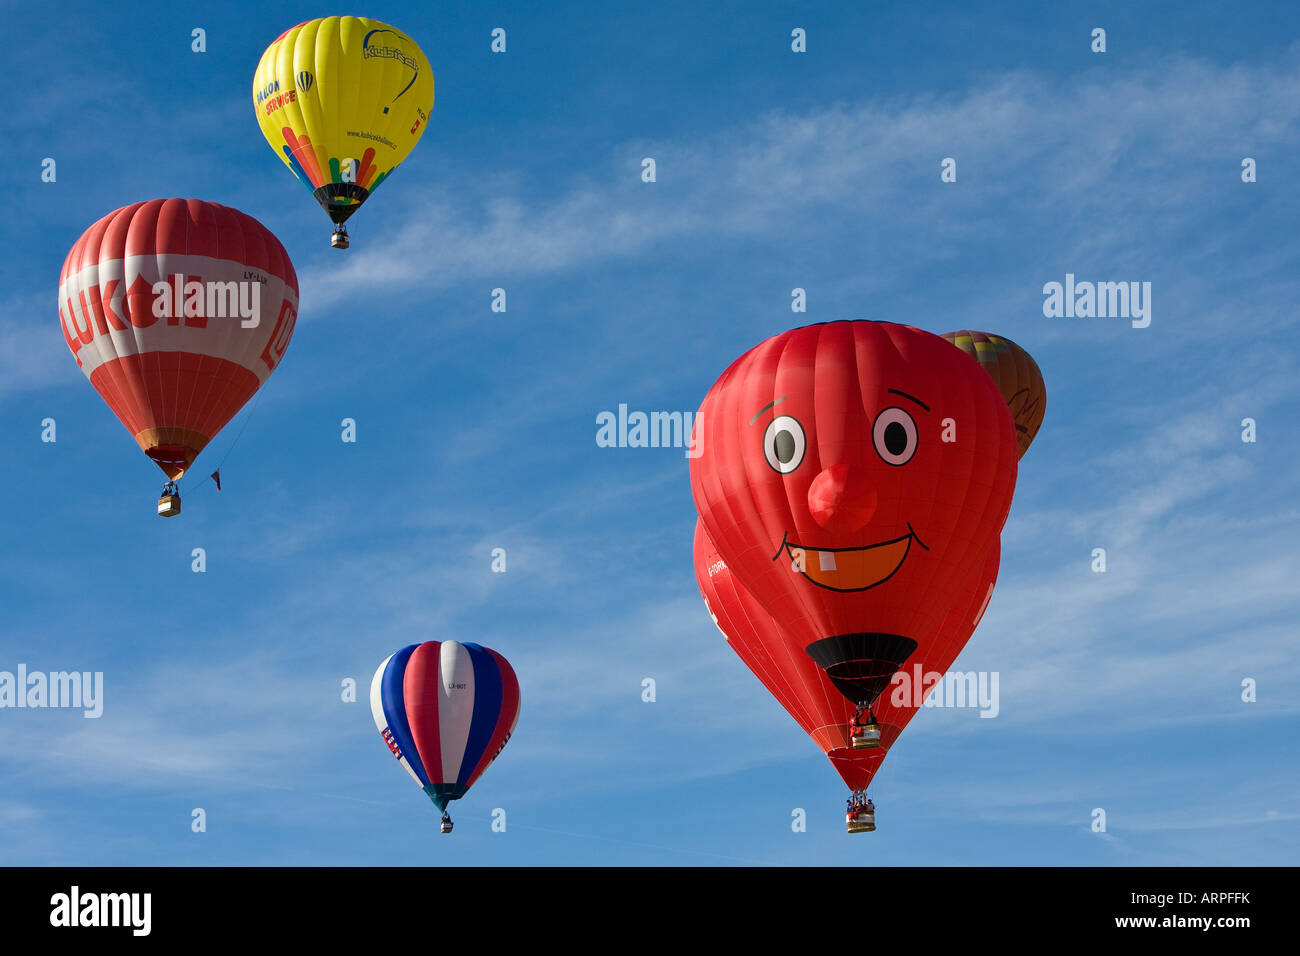 Hot Air Balloons Festival at Chateau d Oex Stock Photo